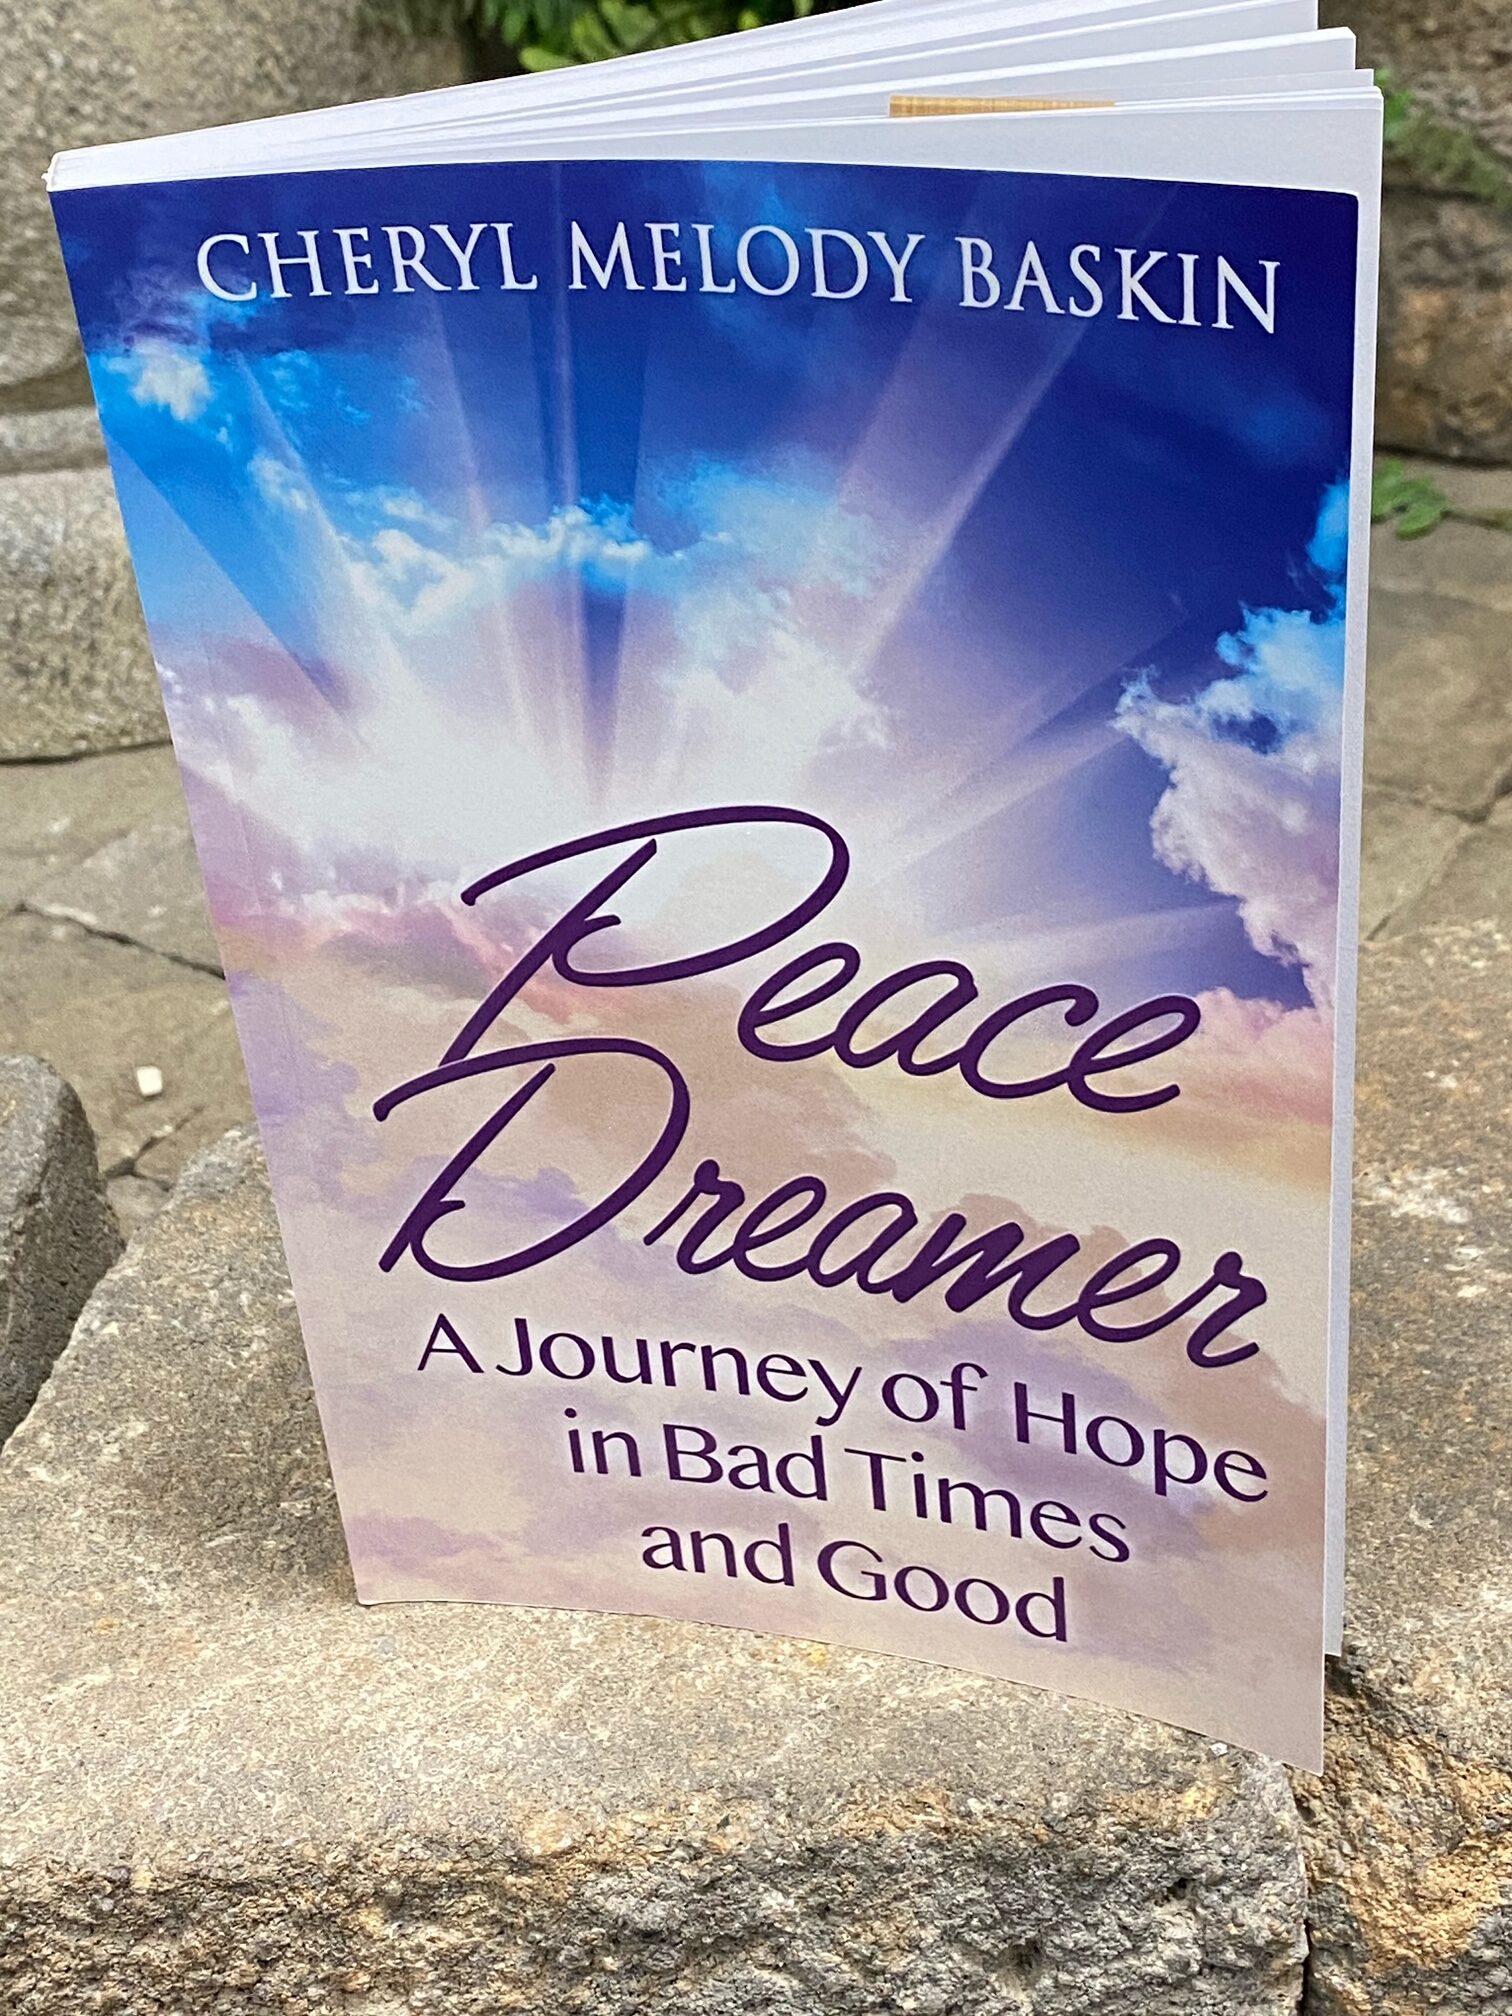 ‘Peace Dreamer’ book created during time of little hope